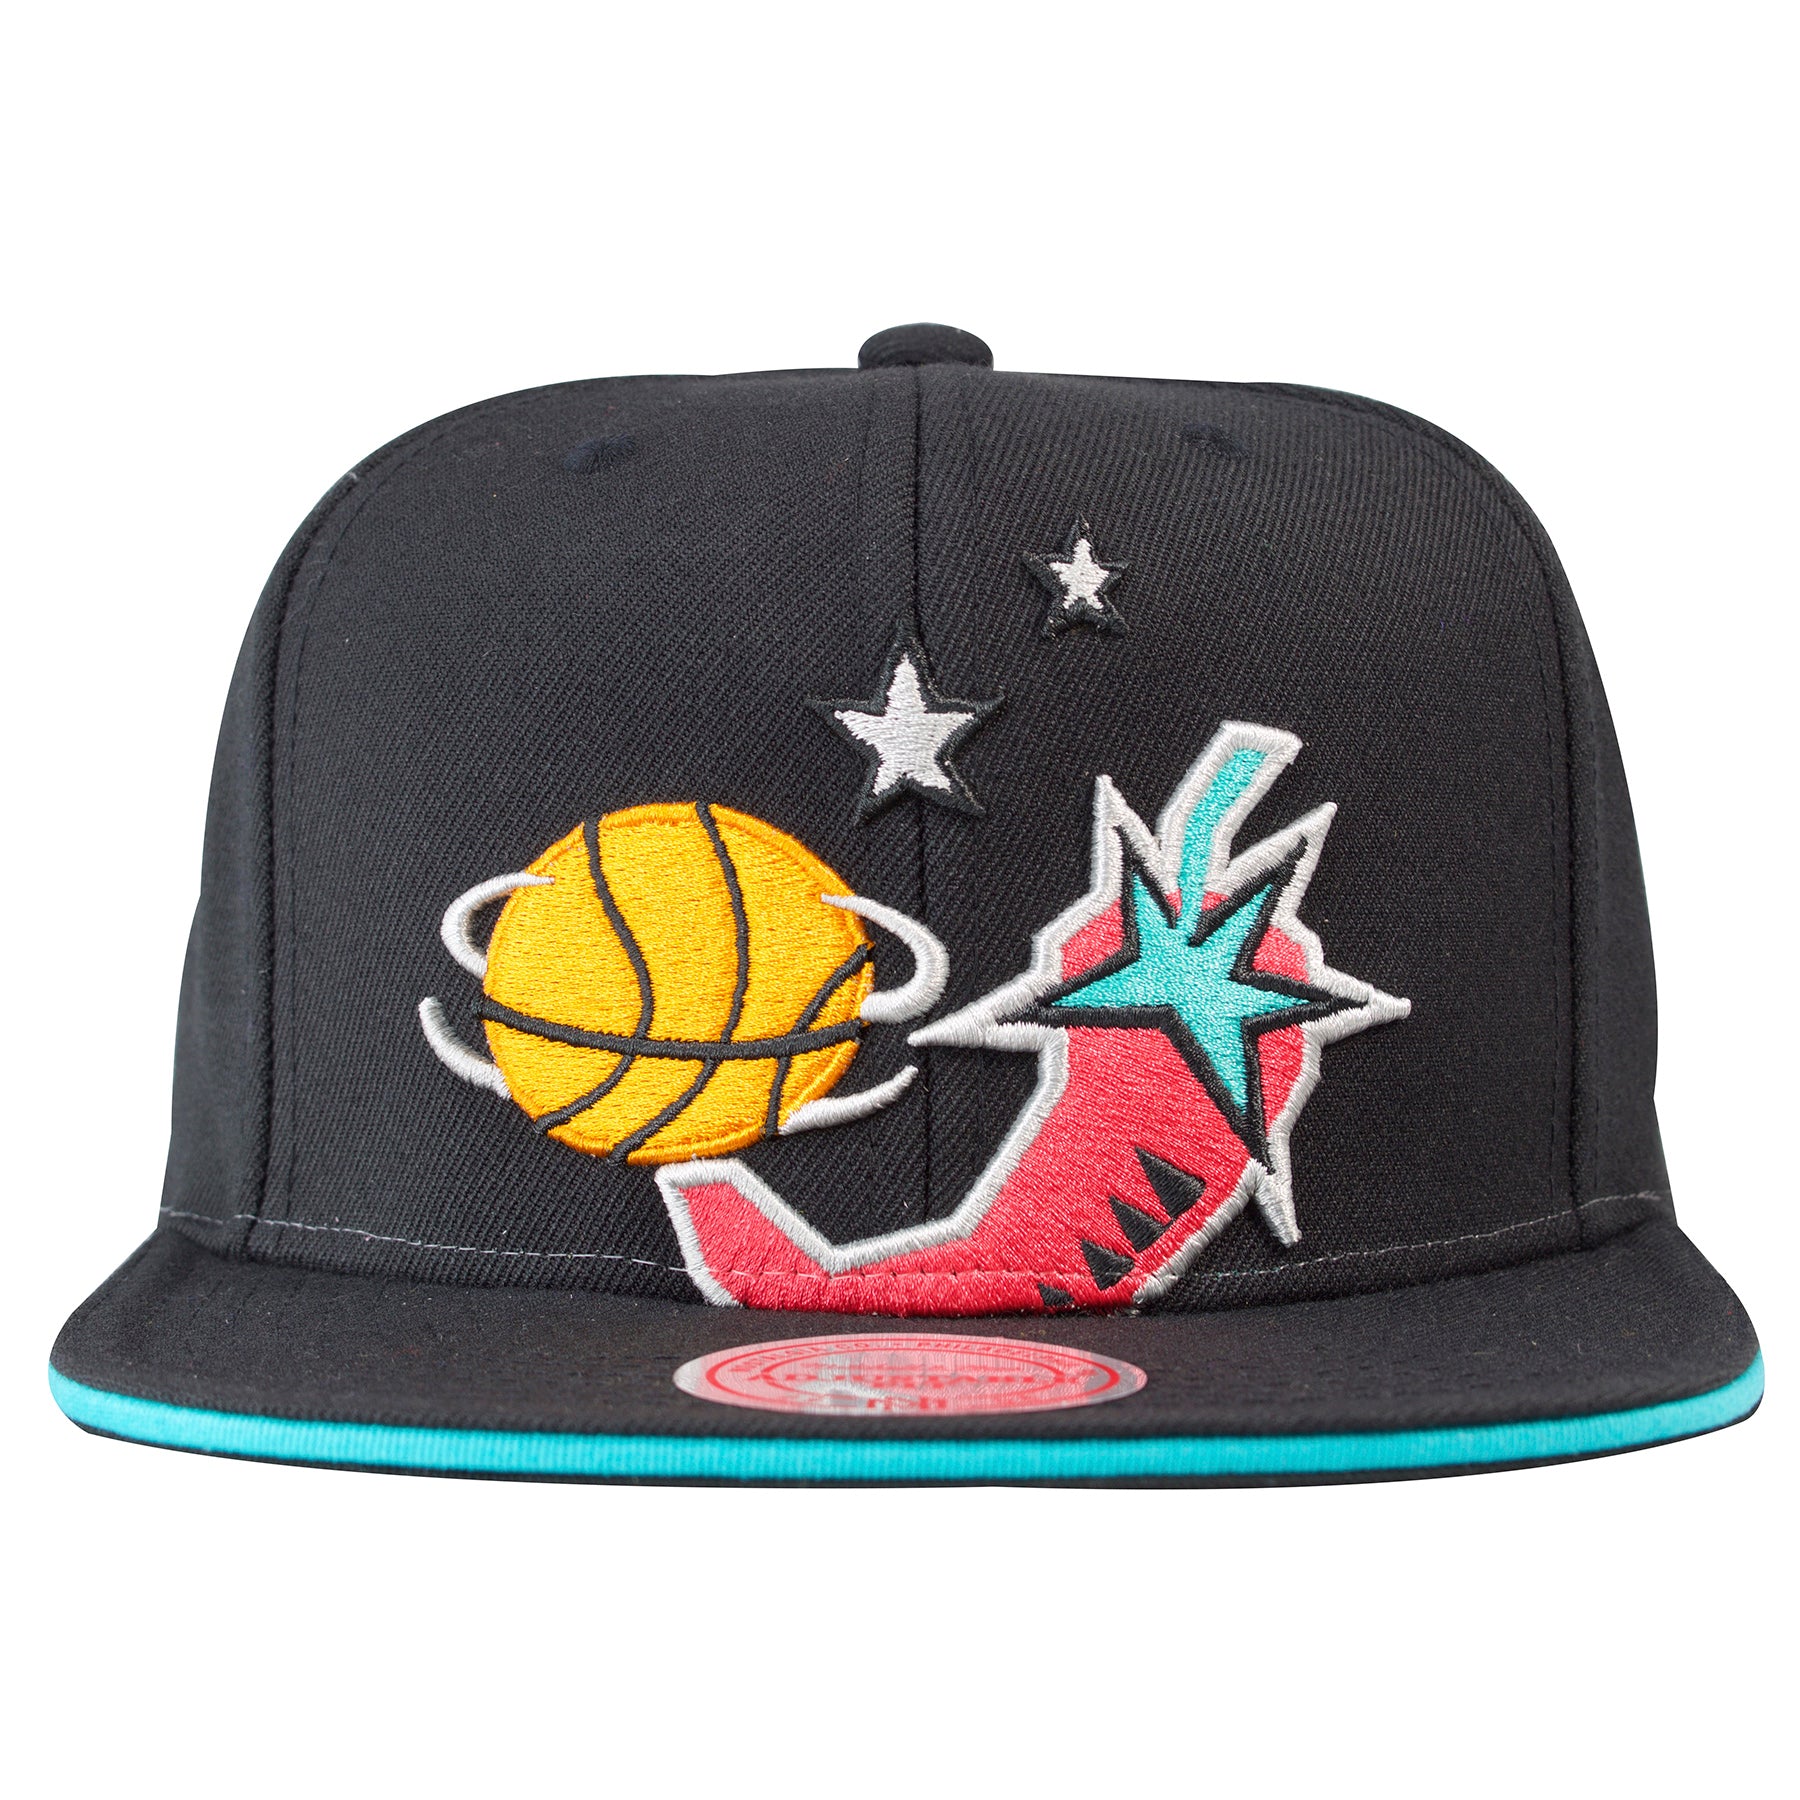 Mitchell & Ness 1996 NBA All Star Weekend Snapback Hat in Teal